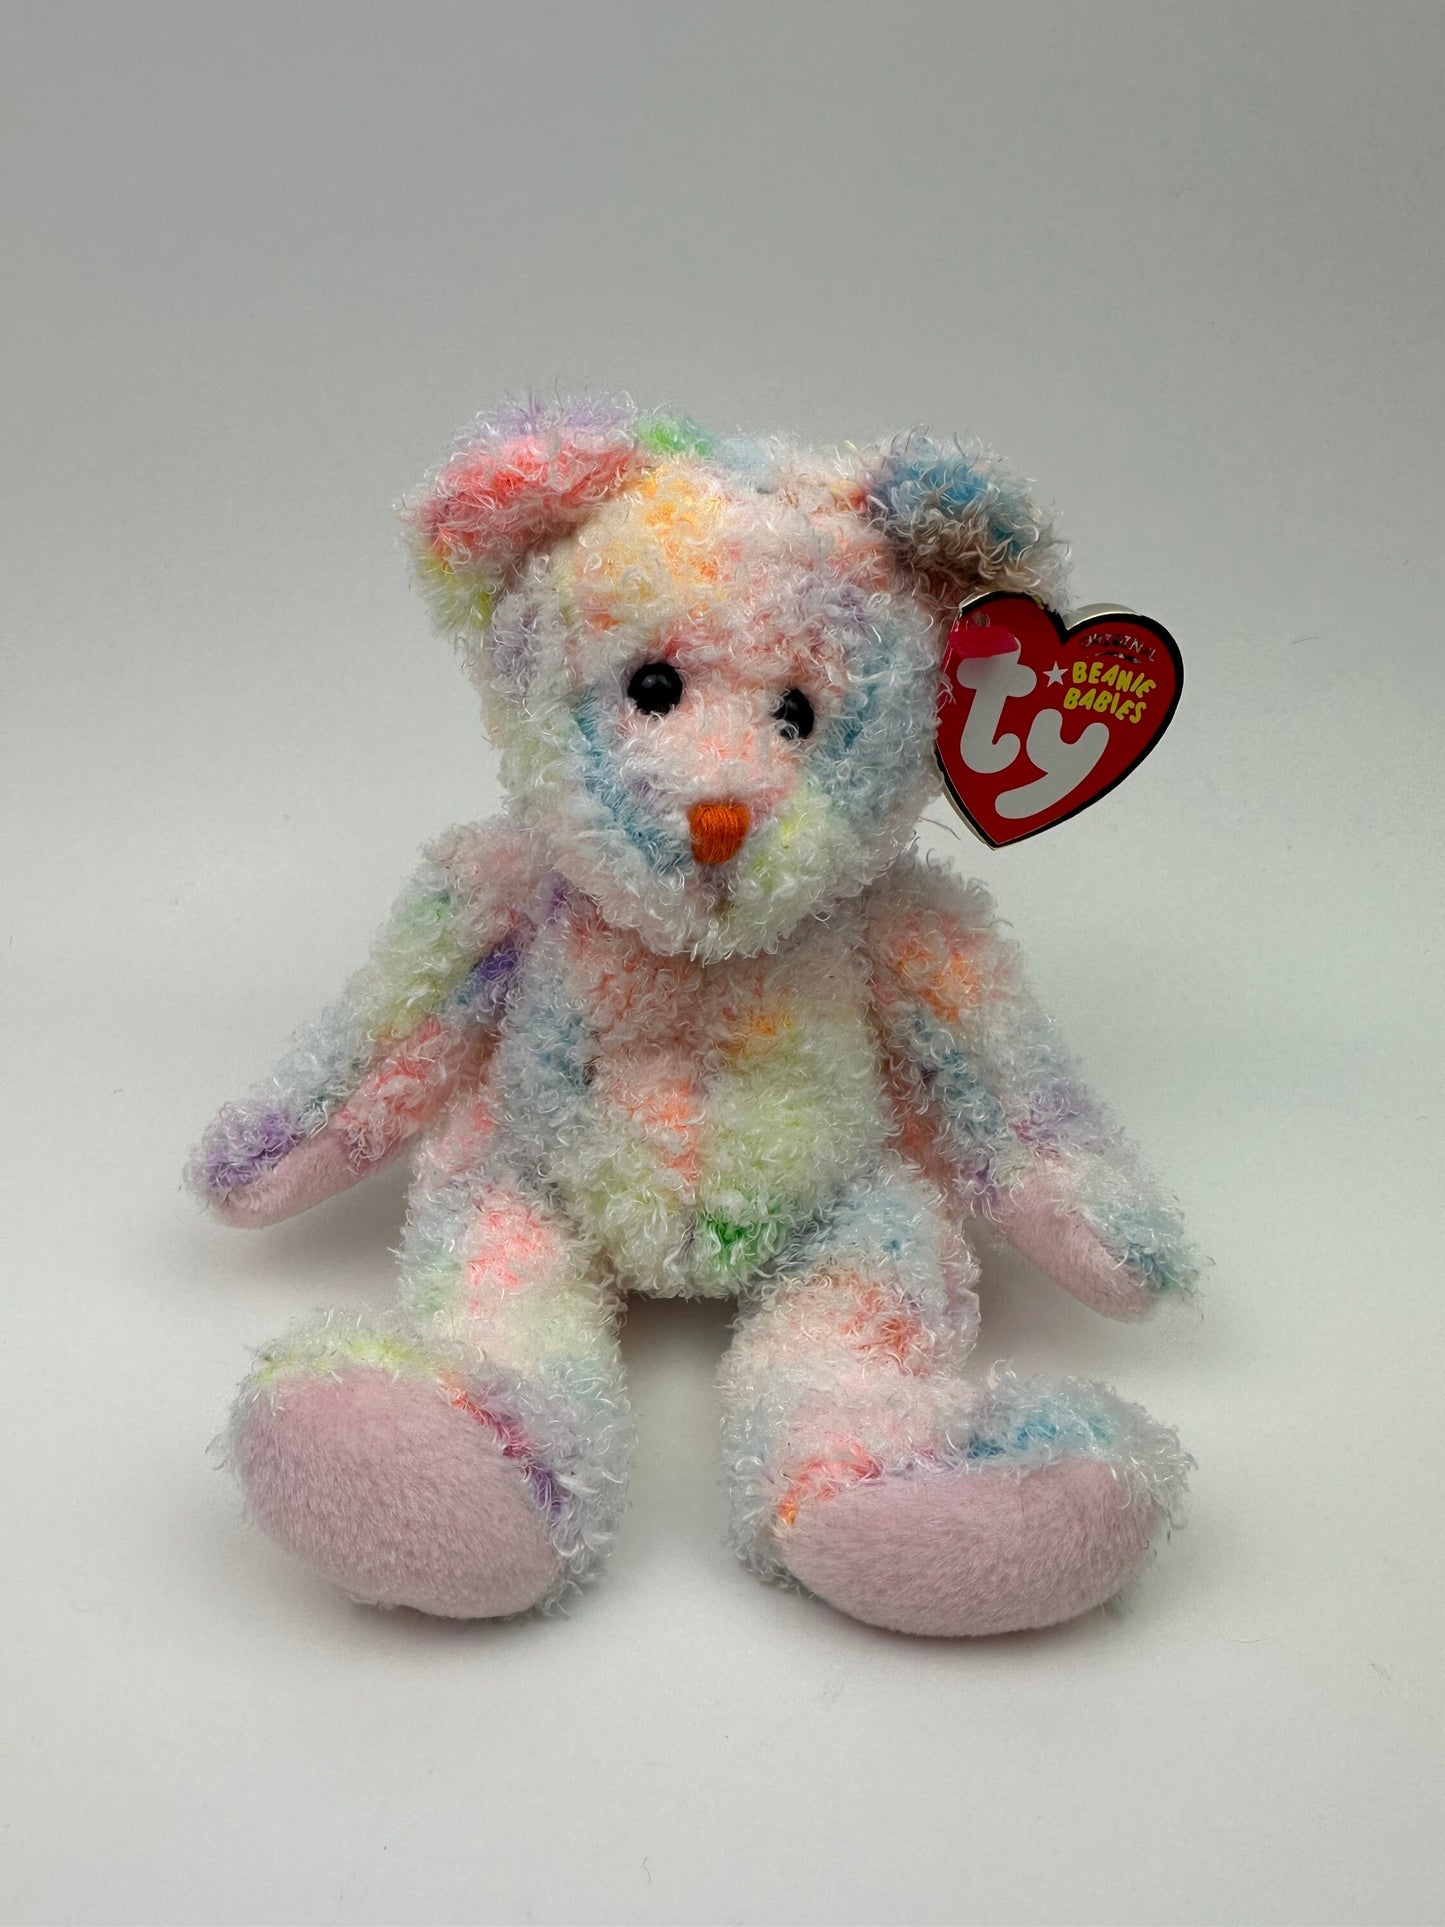 Ty Beanie Baby “Poolside” the Super Cute Multicoloured Bear - Internet Exclusive *Rare* (8.5 inch)